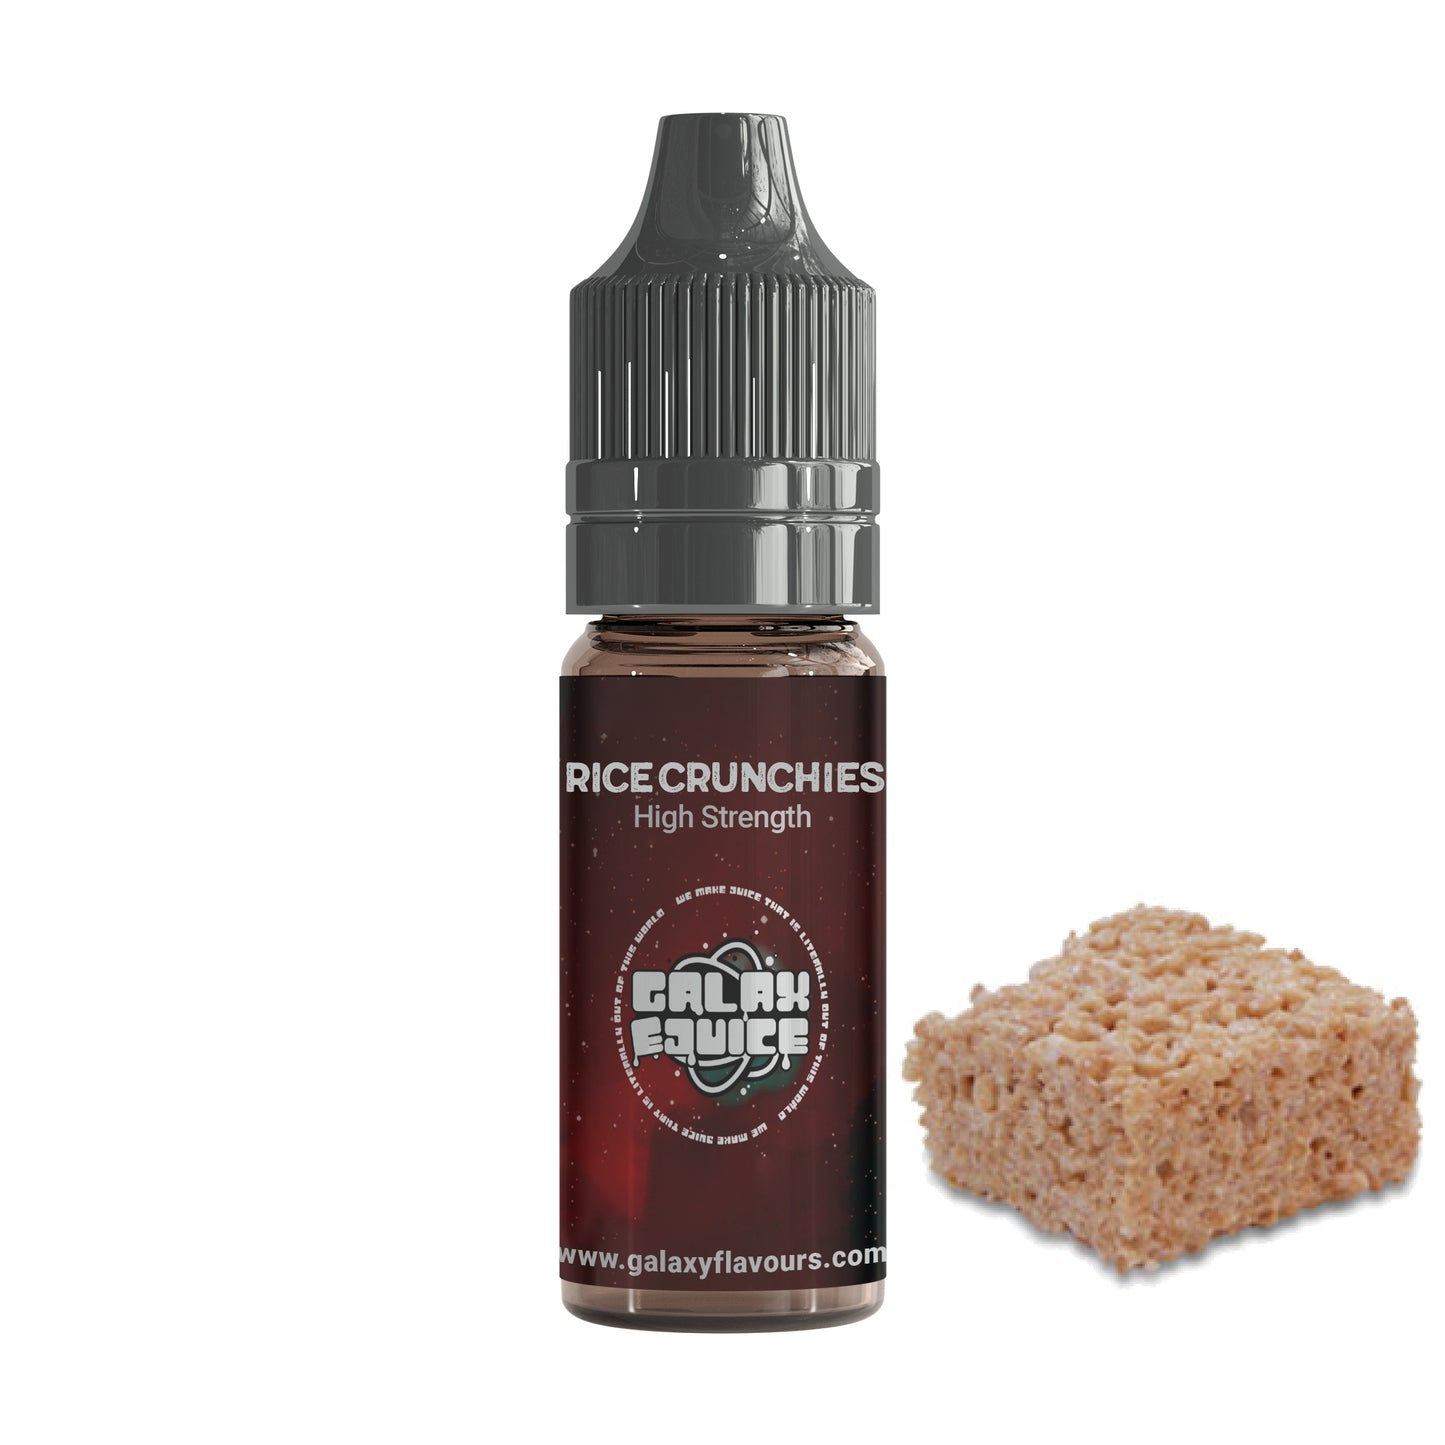 Rice Crunchies High Strength Professional Flavouring.